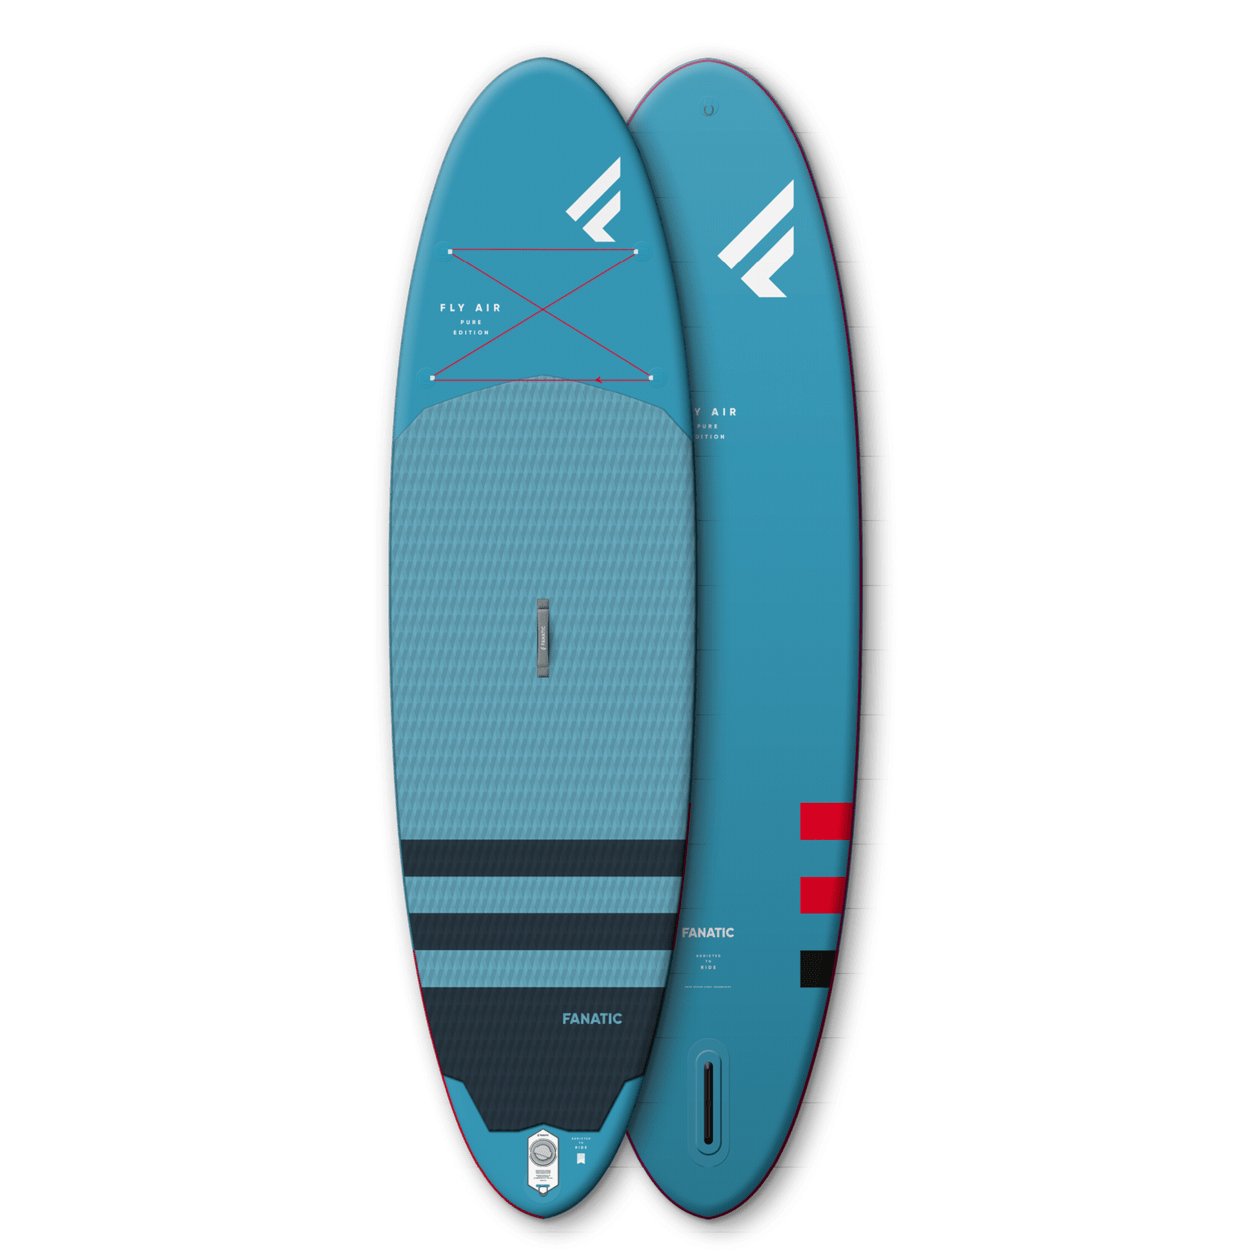 Fanatic Fly Air 2022 (Blue) - Worthing Watersports - 9008415922789 - SUP Inflatables - Fanatic SUP